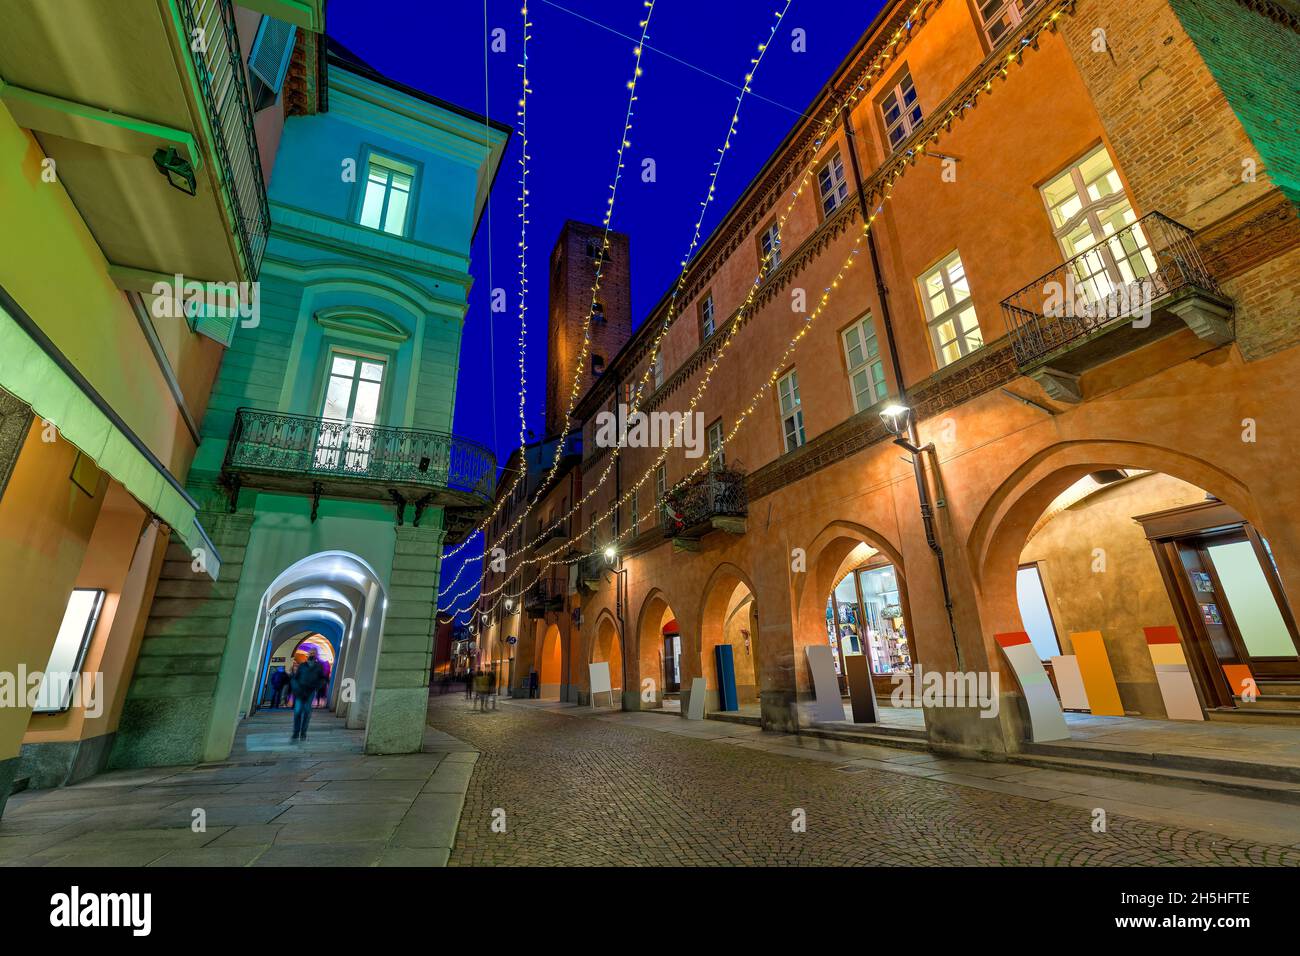 Narrow cobblestone street among historic buildings illuminated by Christmas lights in the evening in old town of Alba, Piedmont, Northern Italy. Stock Photo